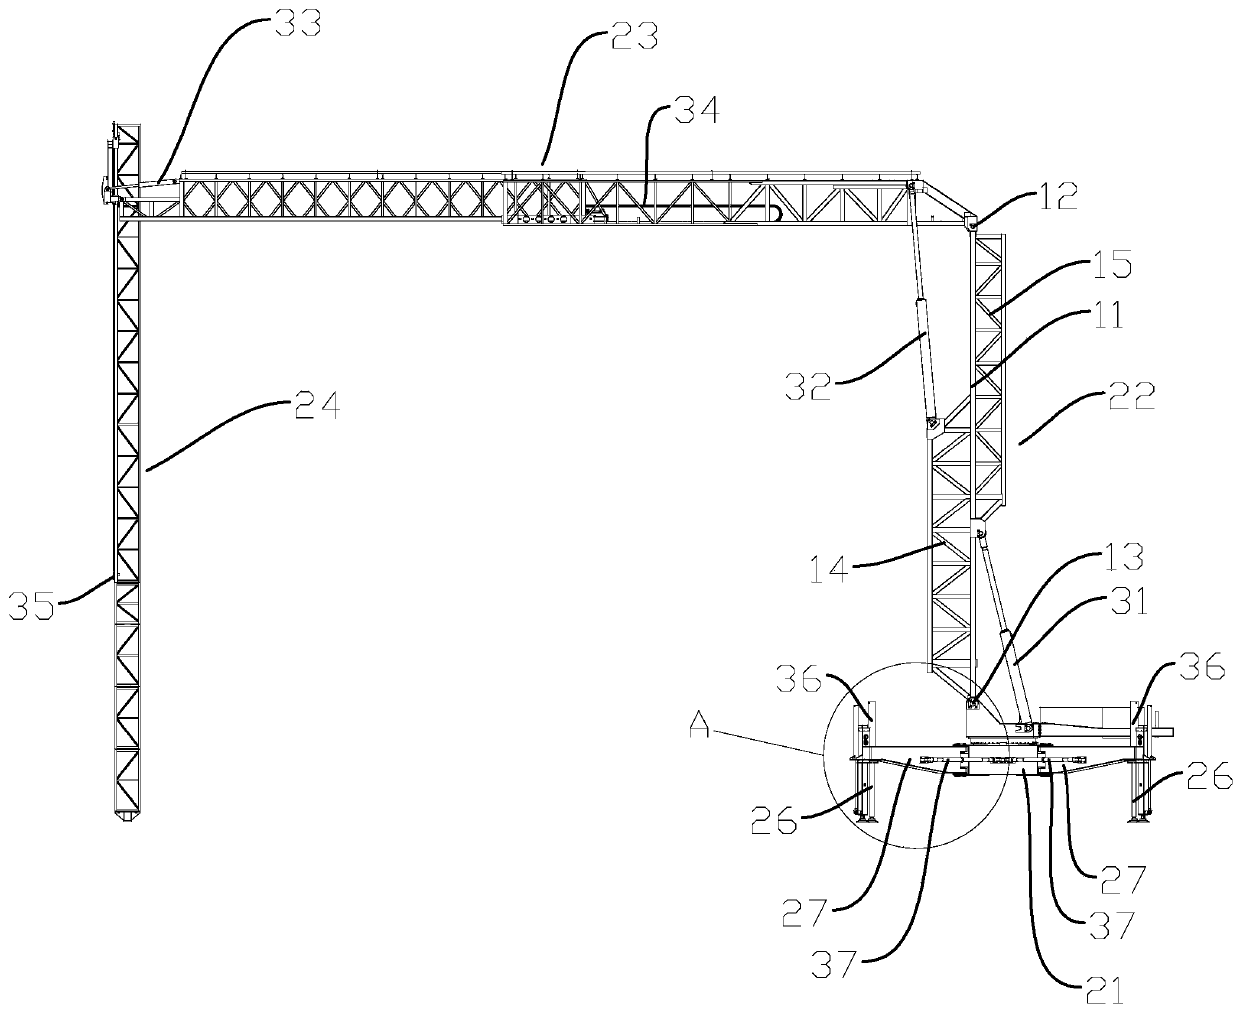 Truss tower and spanning construction protection equipment comprising same